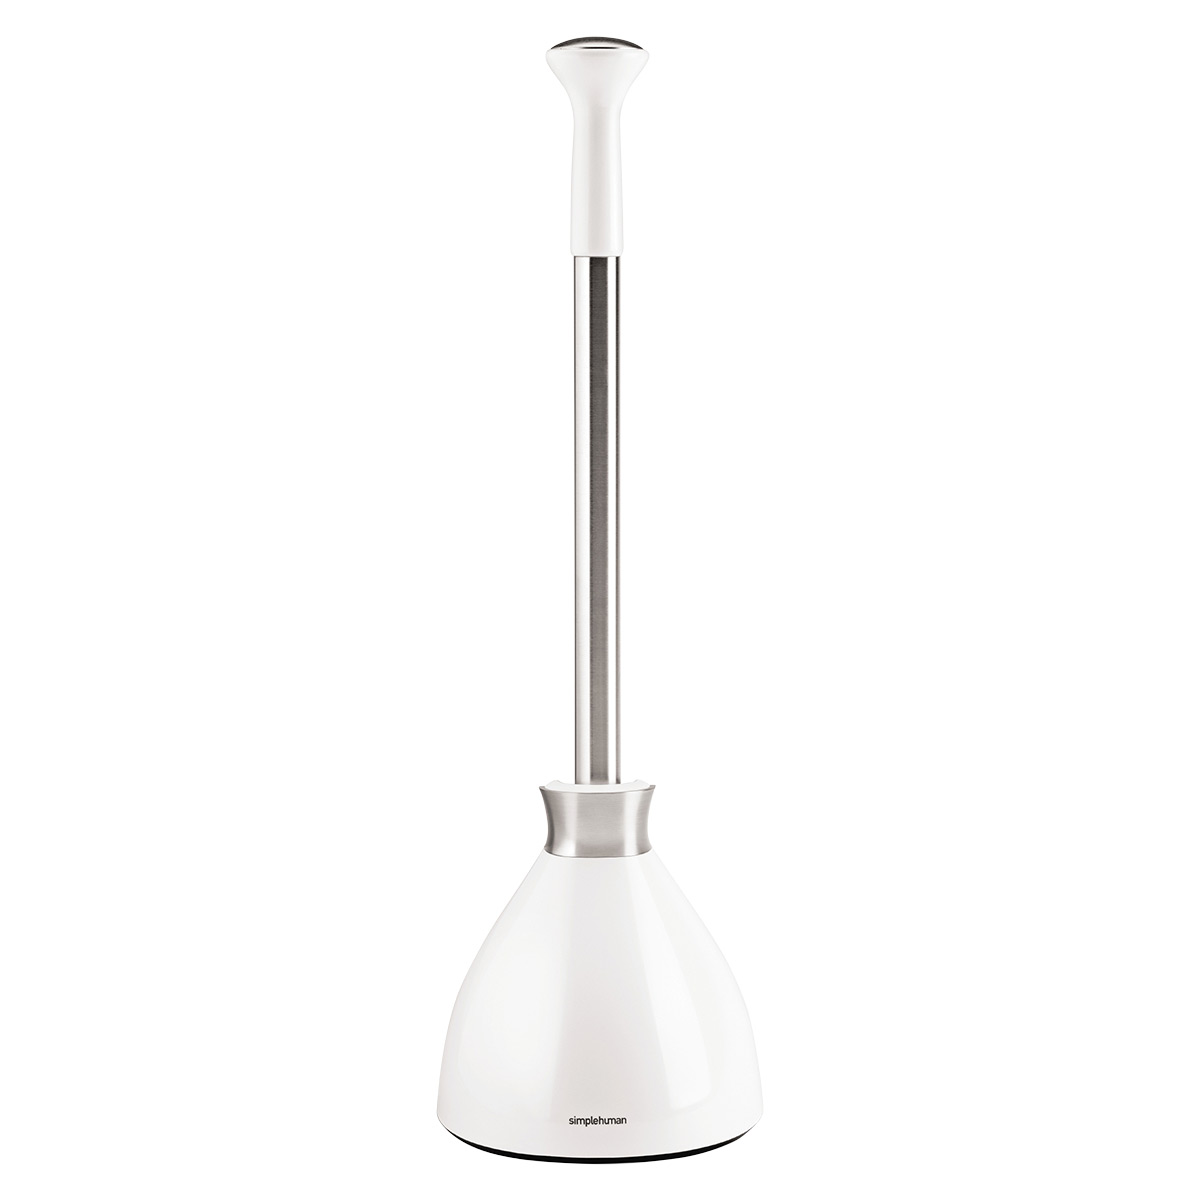 https://www.containerstore.com/catalogimages/393438/10082529-Simple-Human-Plunger-White-.jpg